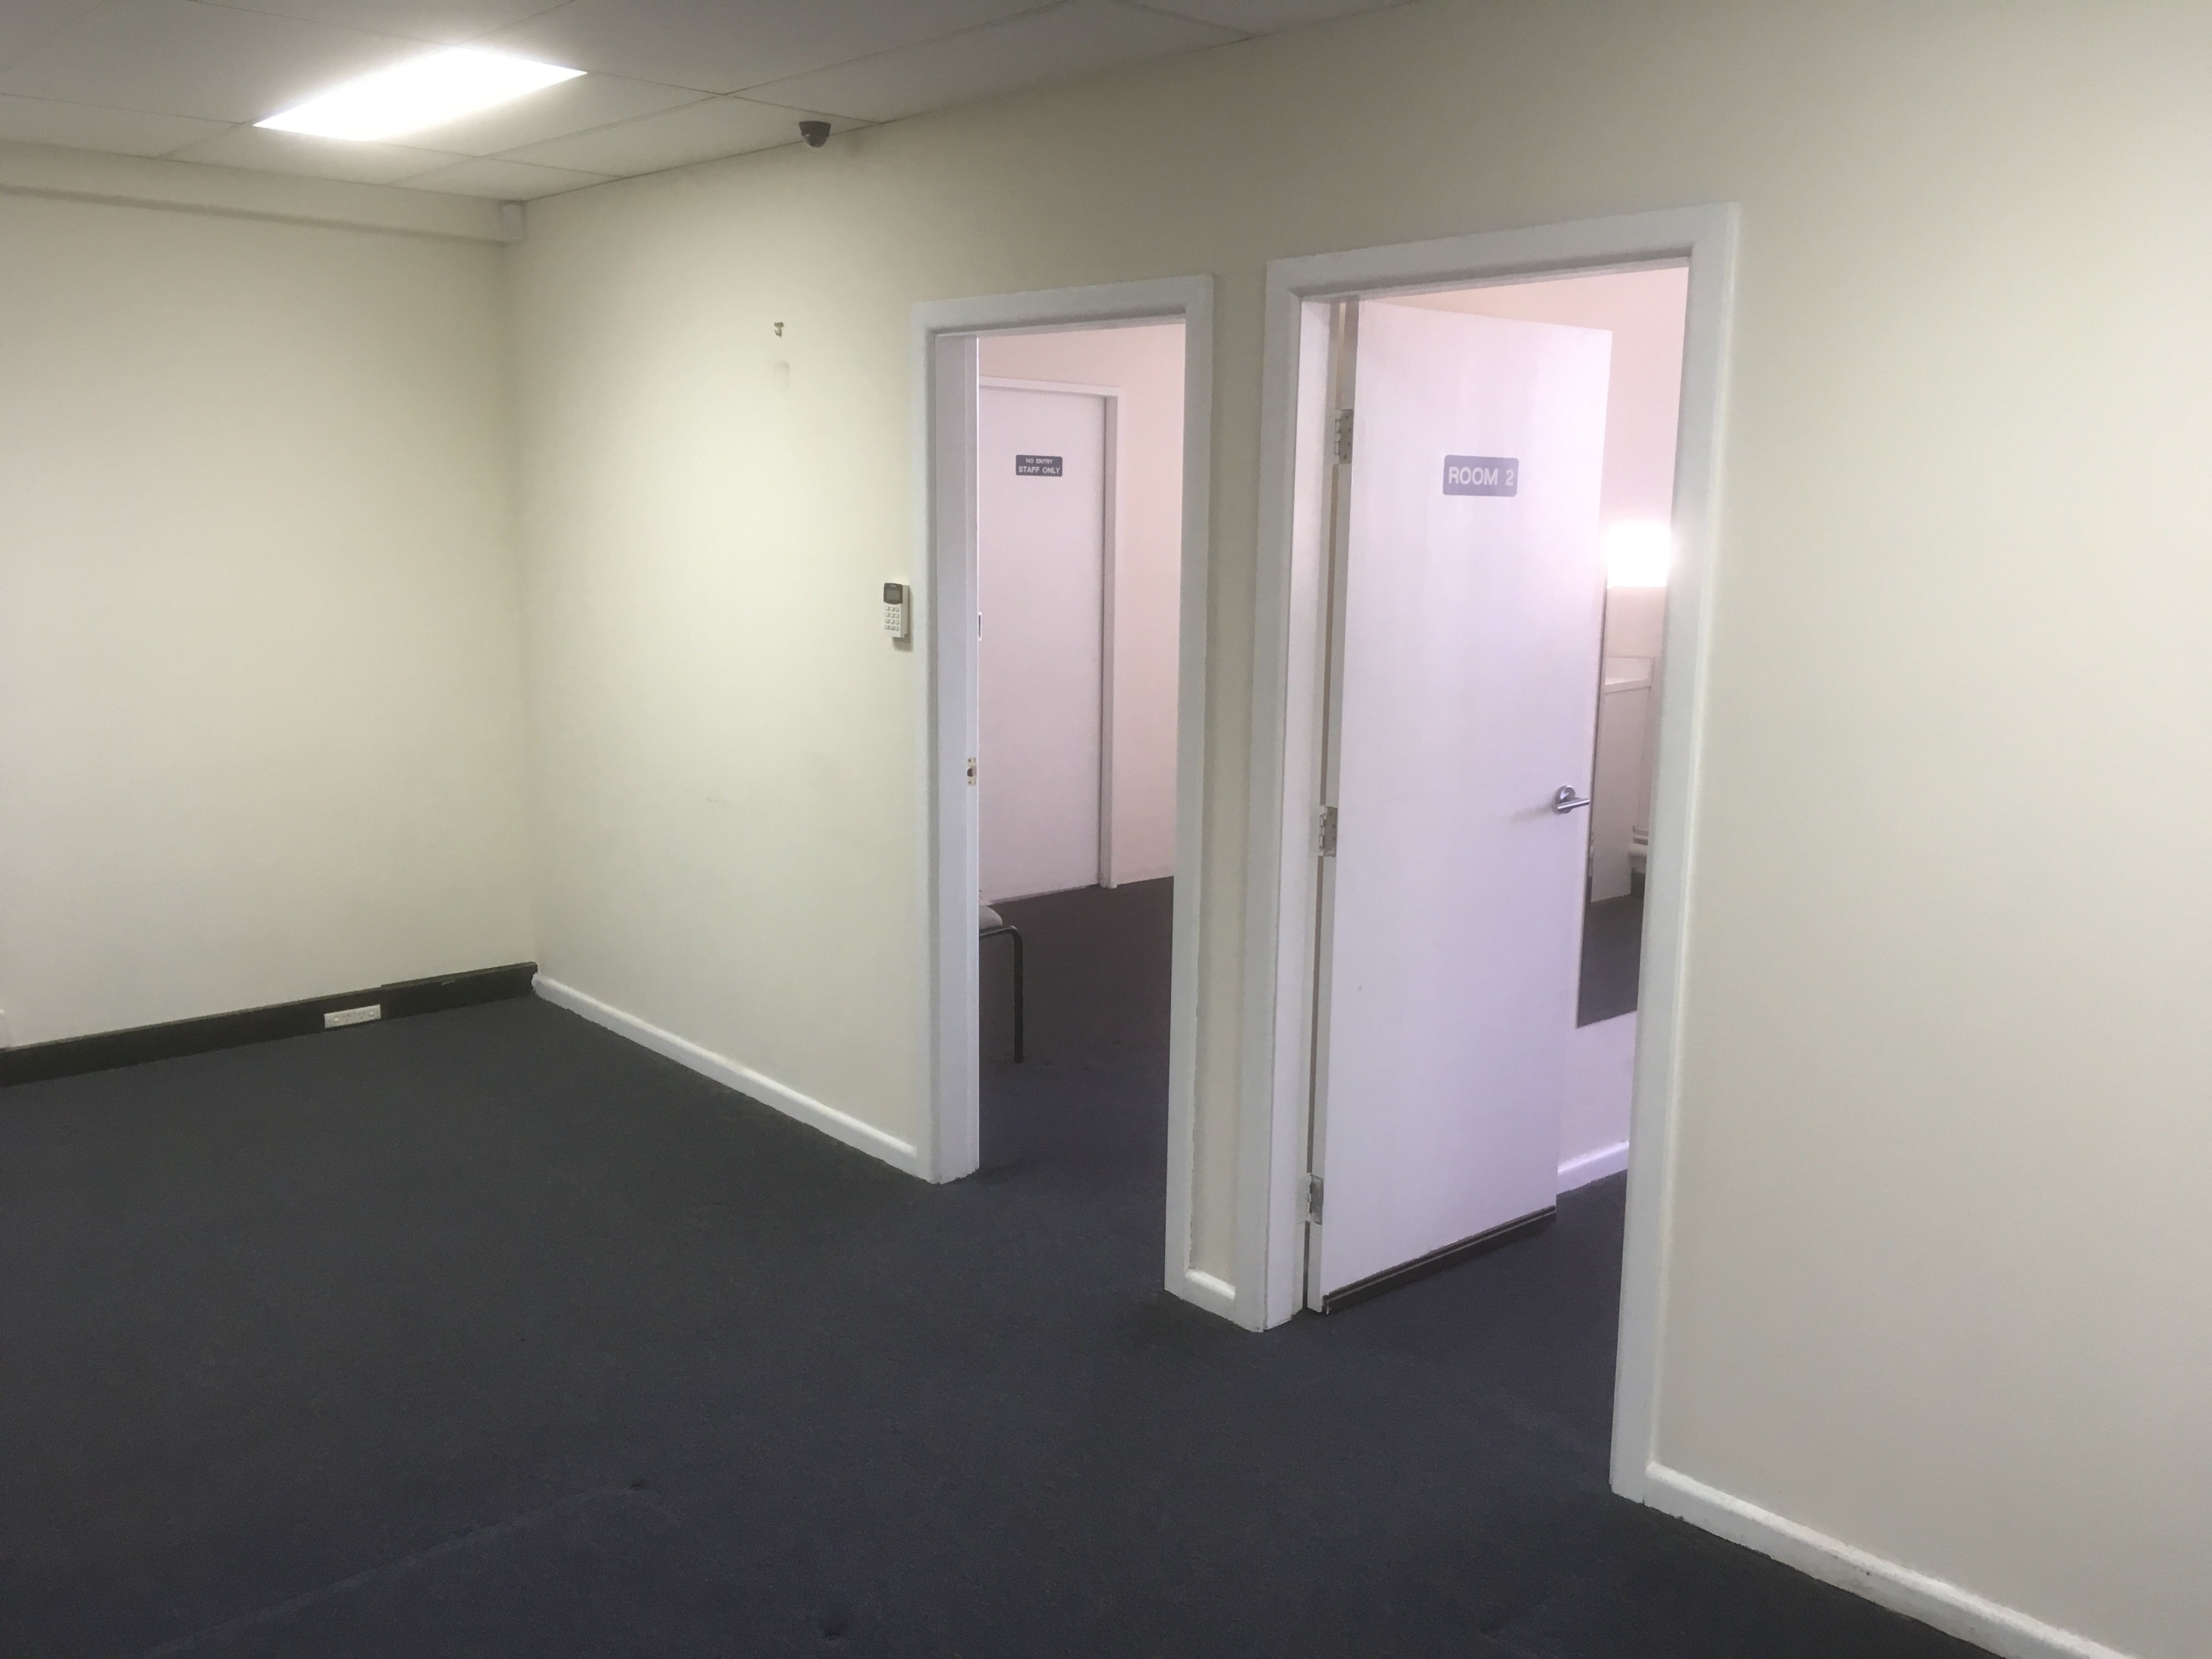 Commercial property for lease in kings langley 3